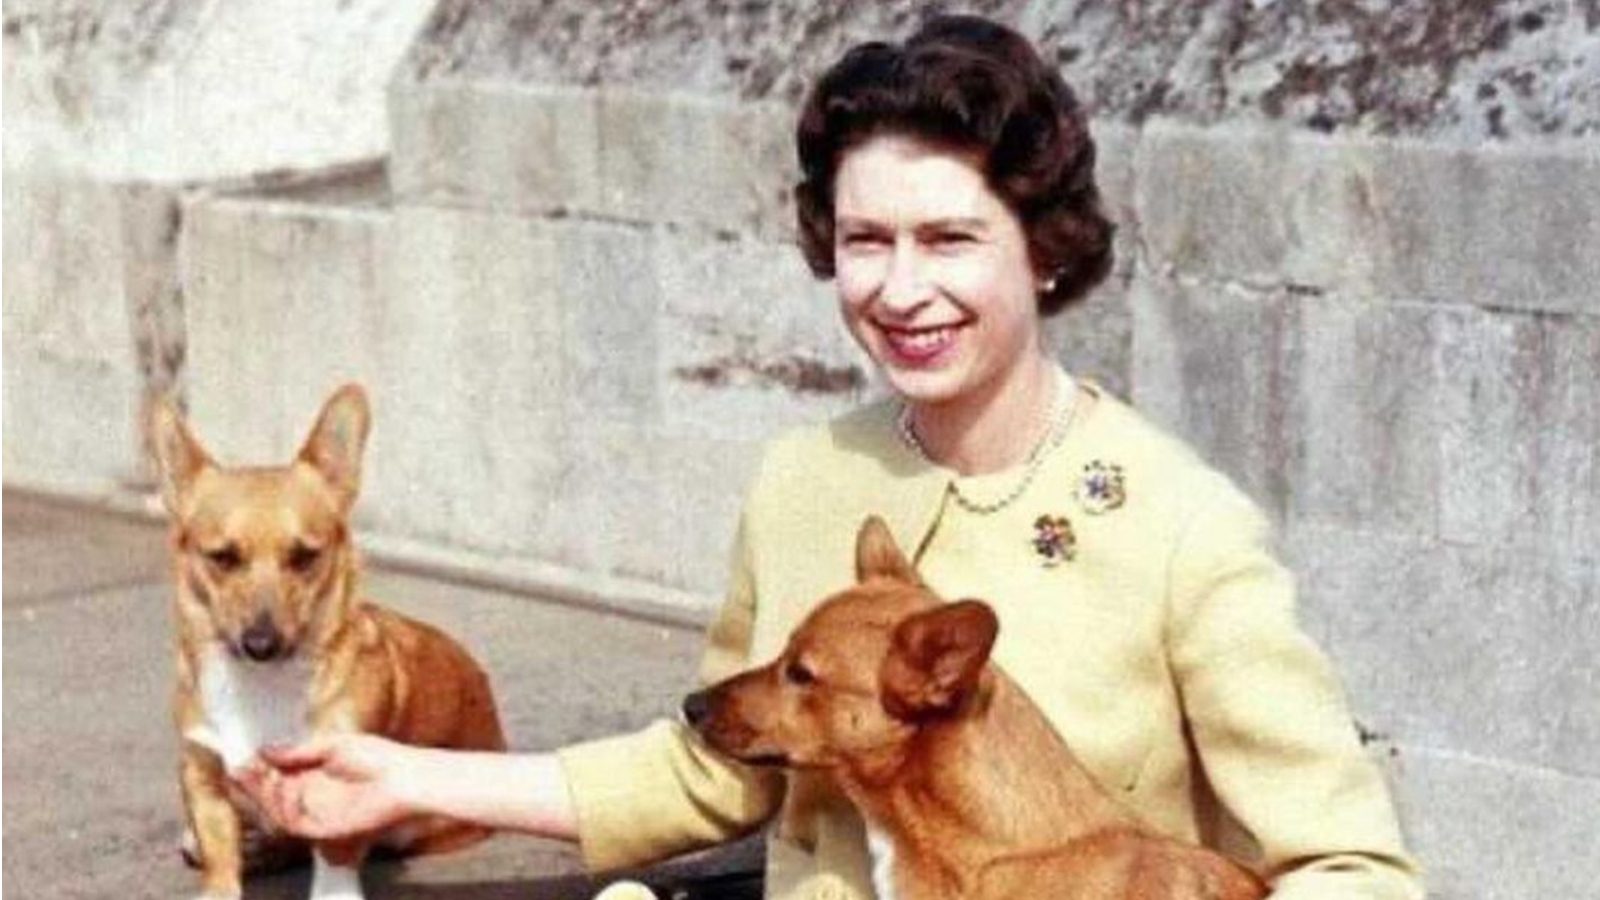 Did You Know Queen Elizabeth Chose Kindness Over Cruelty by Banishing Fur from her Royal Wardrobe?